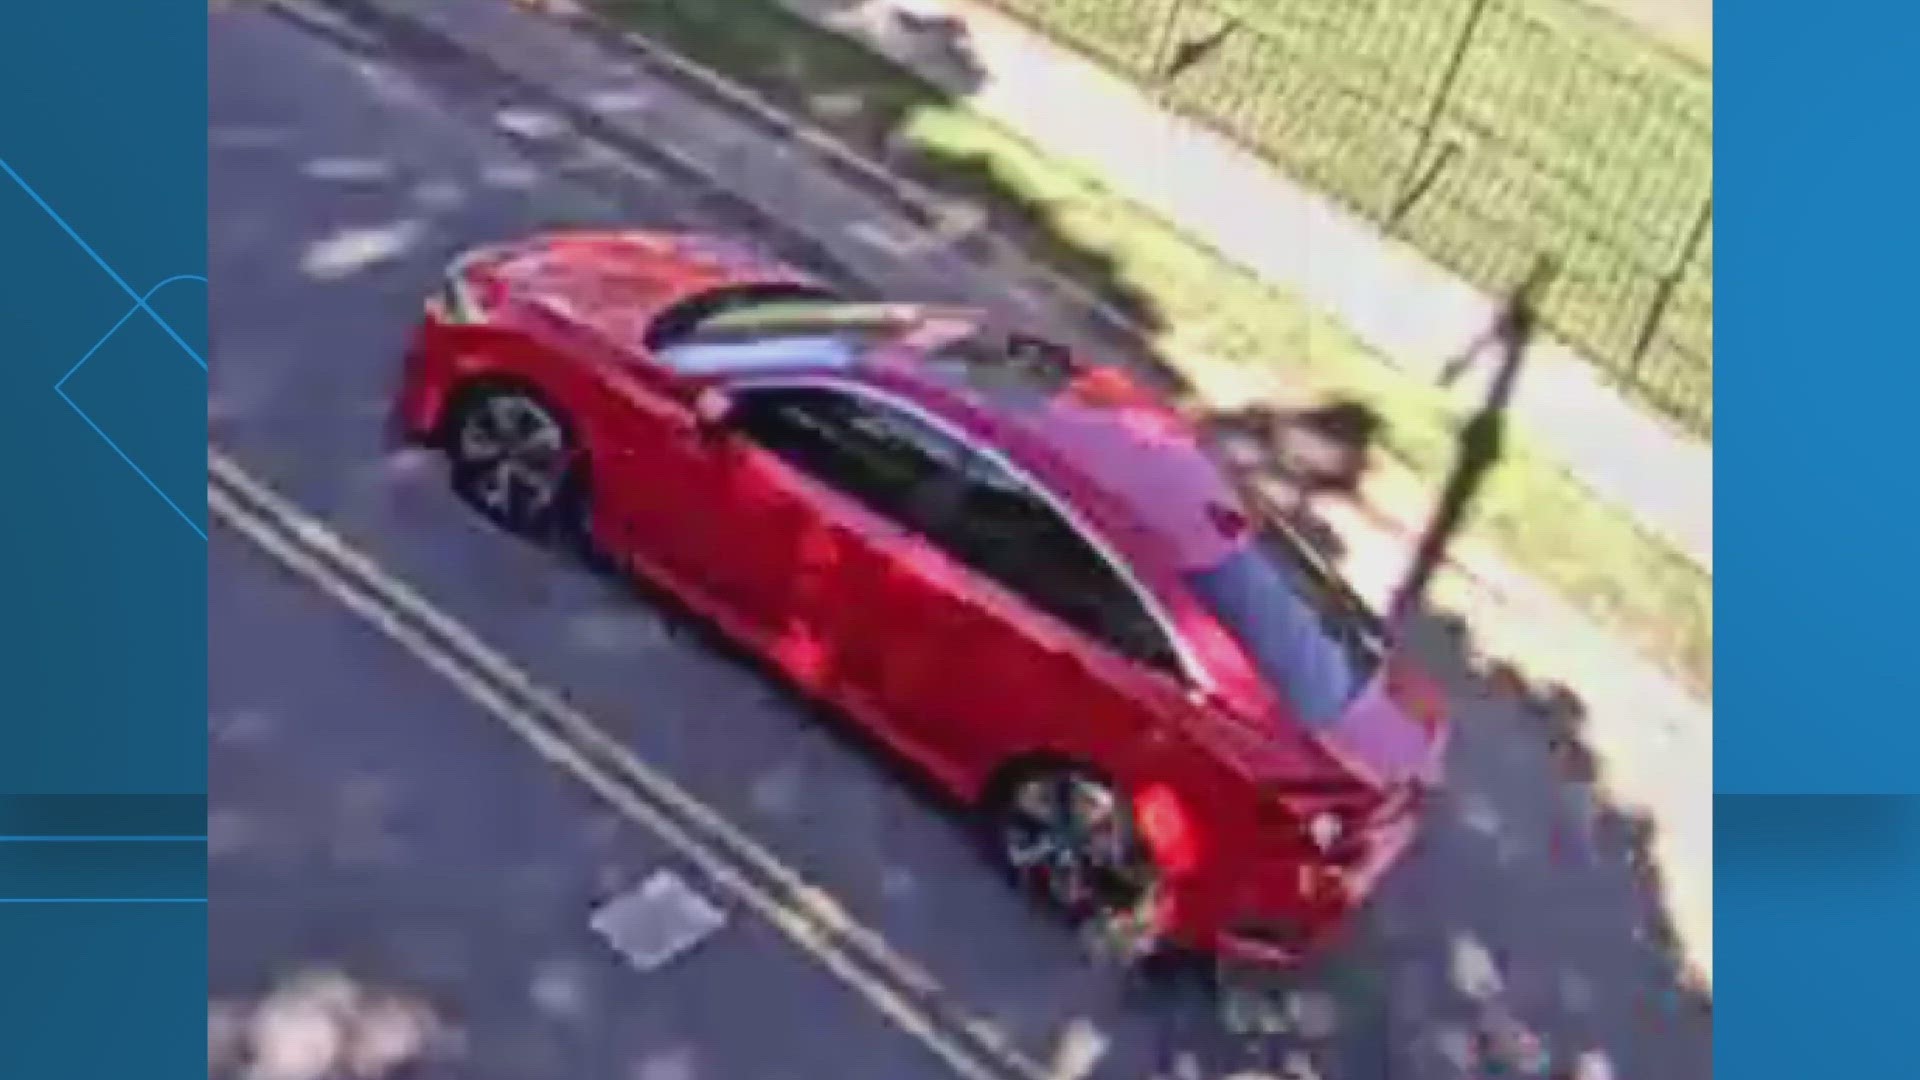 DC Police are searching for a red four-door Honda seen driving away from the shooting on MLK Jr. Ave, SW.